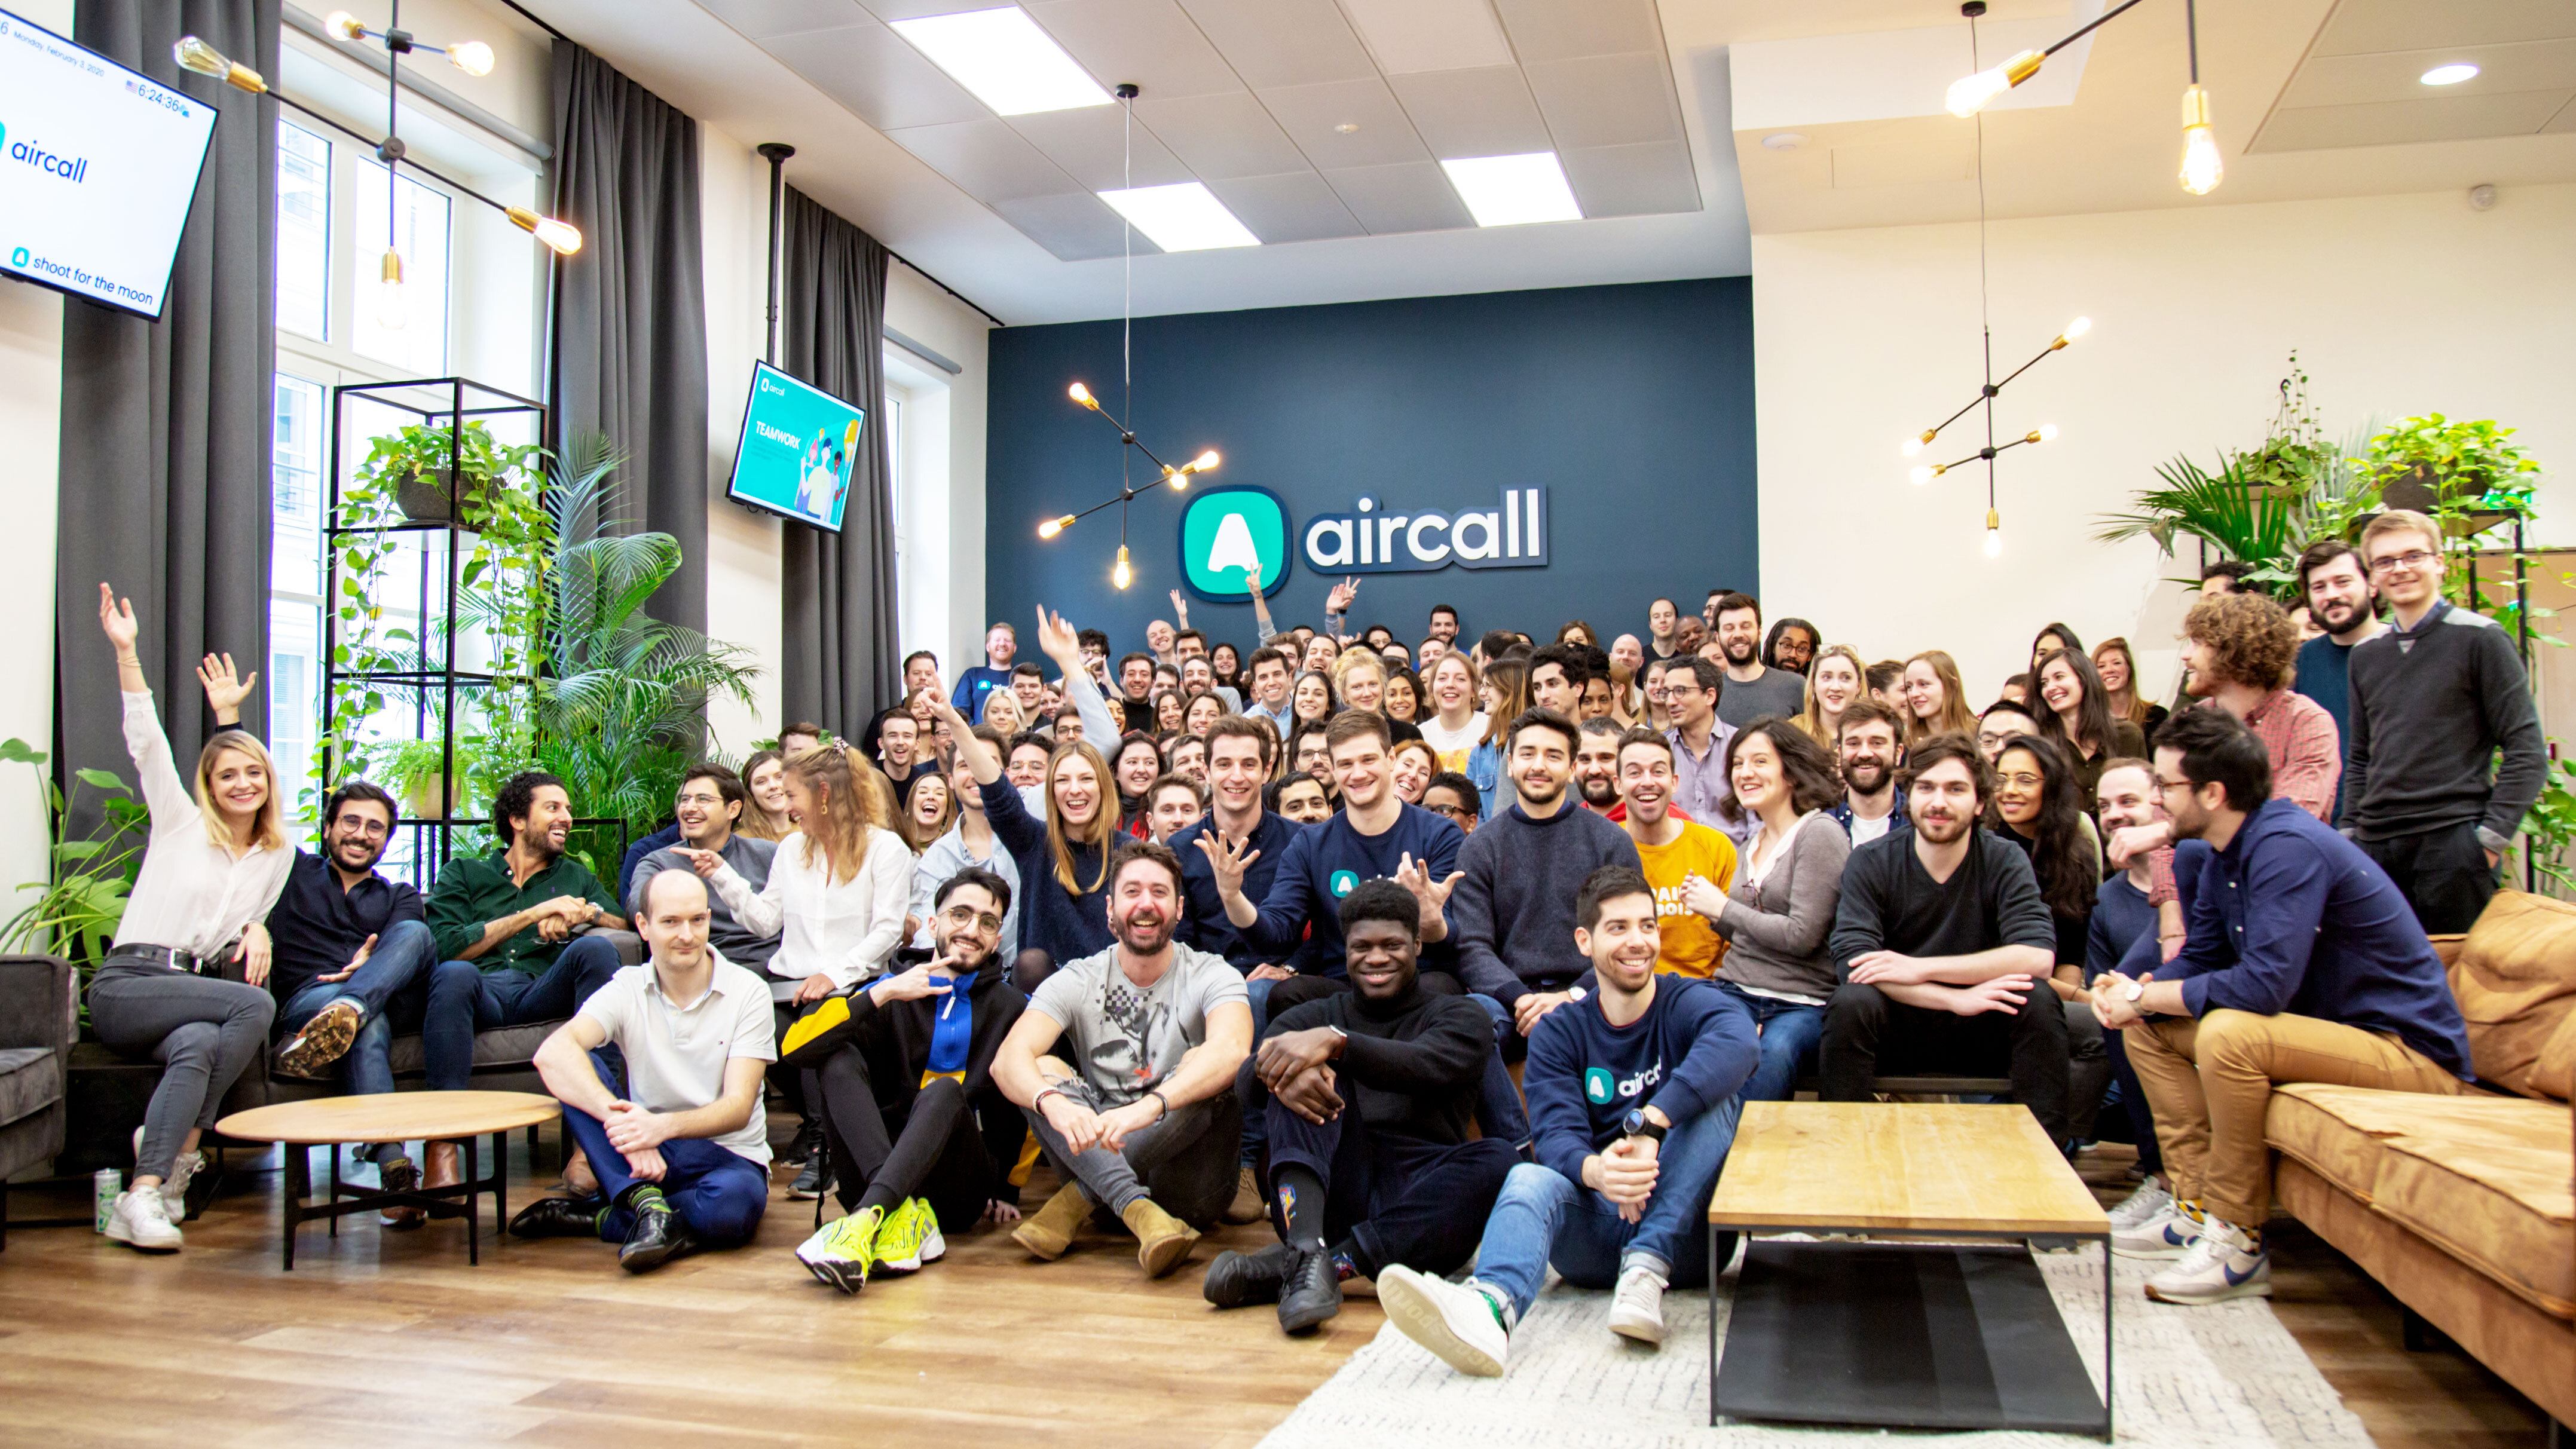 Aircall raises $65 million for its cloud-based phone system